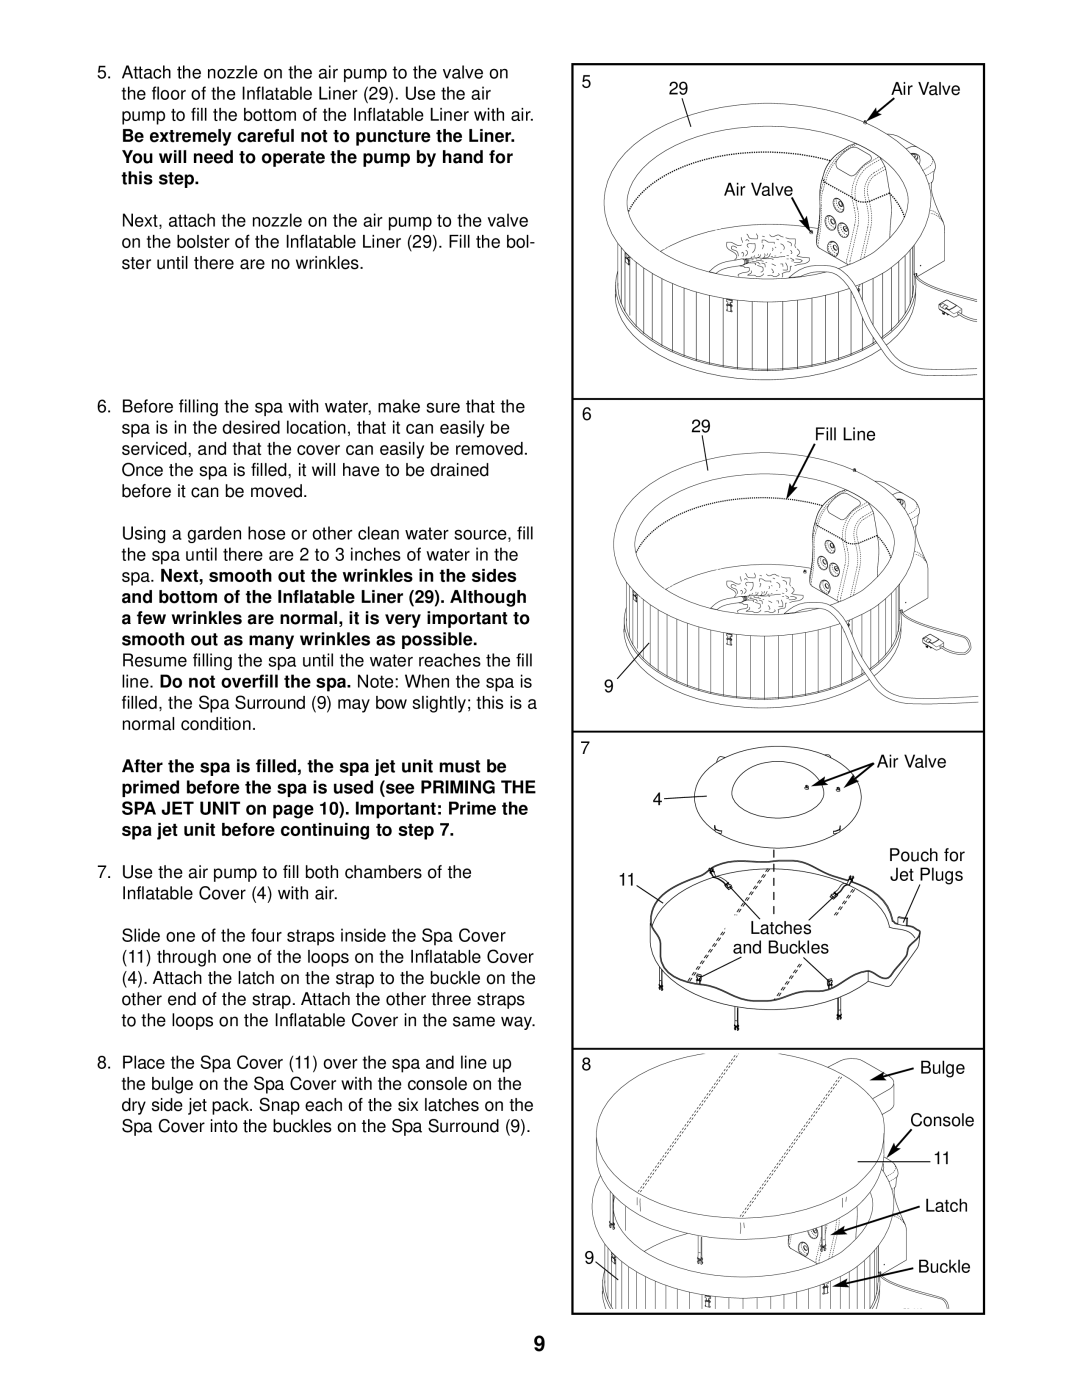 Image 831.10815 user manual line. Do not overfill the spa, Air Valve 